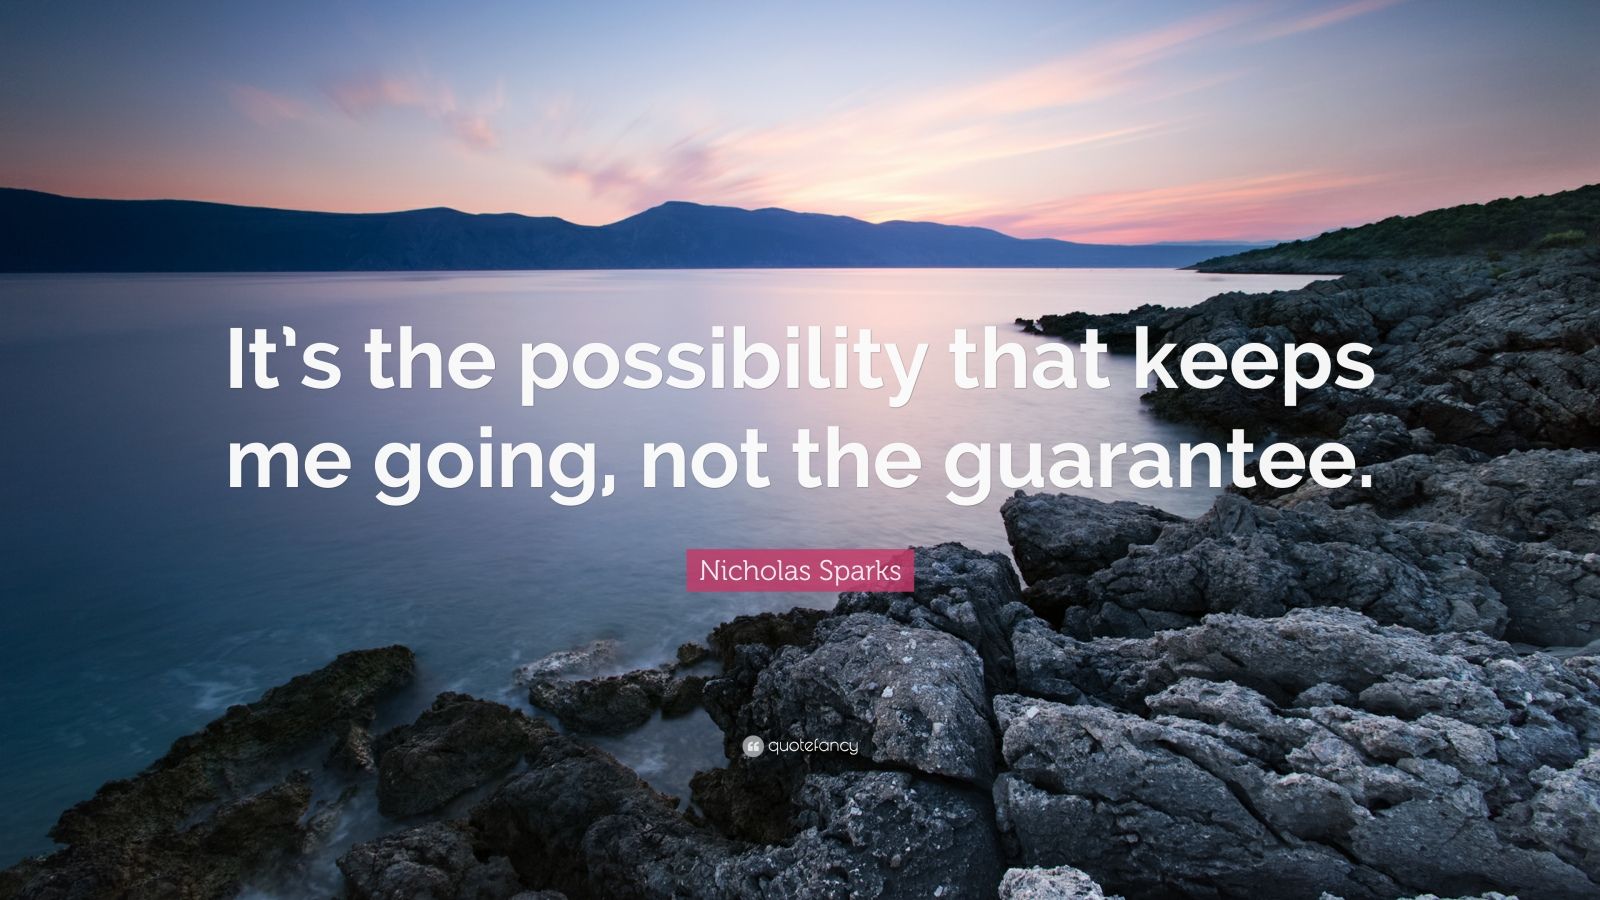 Nicholas Sparks Quote: “It’s the possibility that keeps me going, not ...